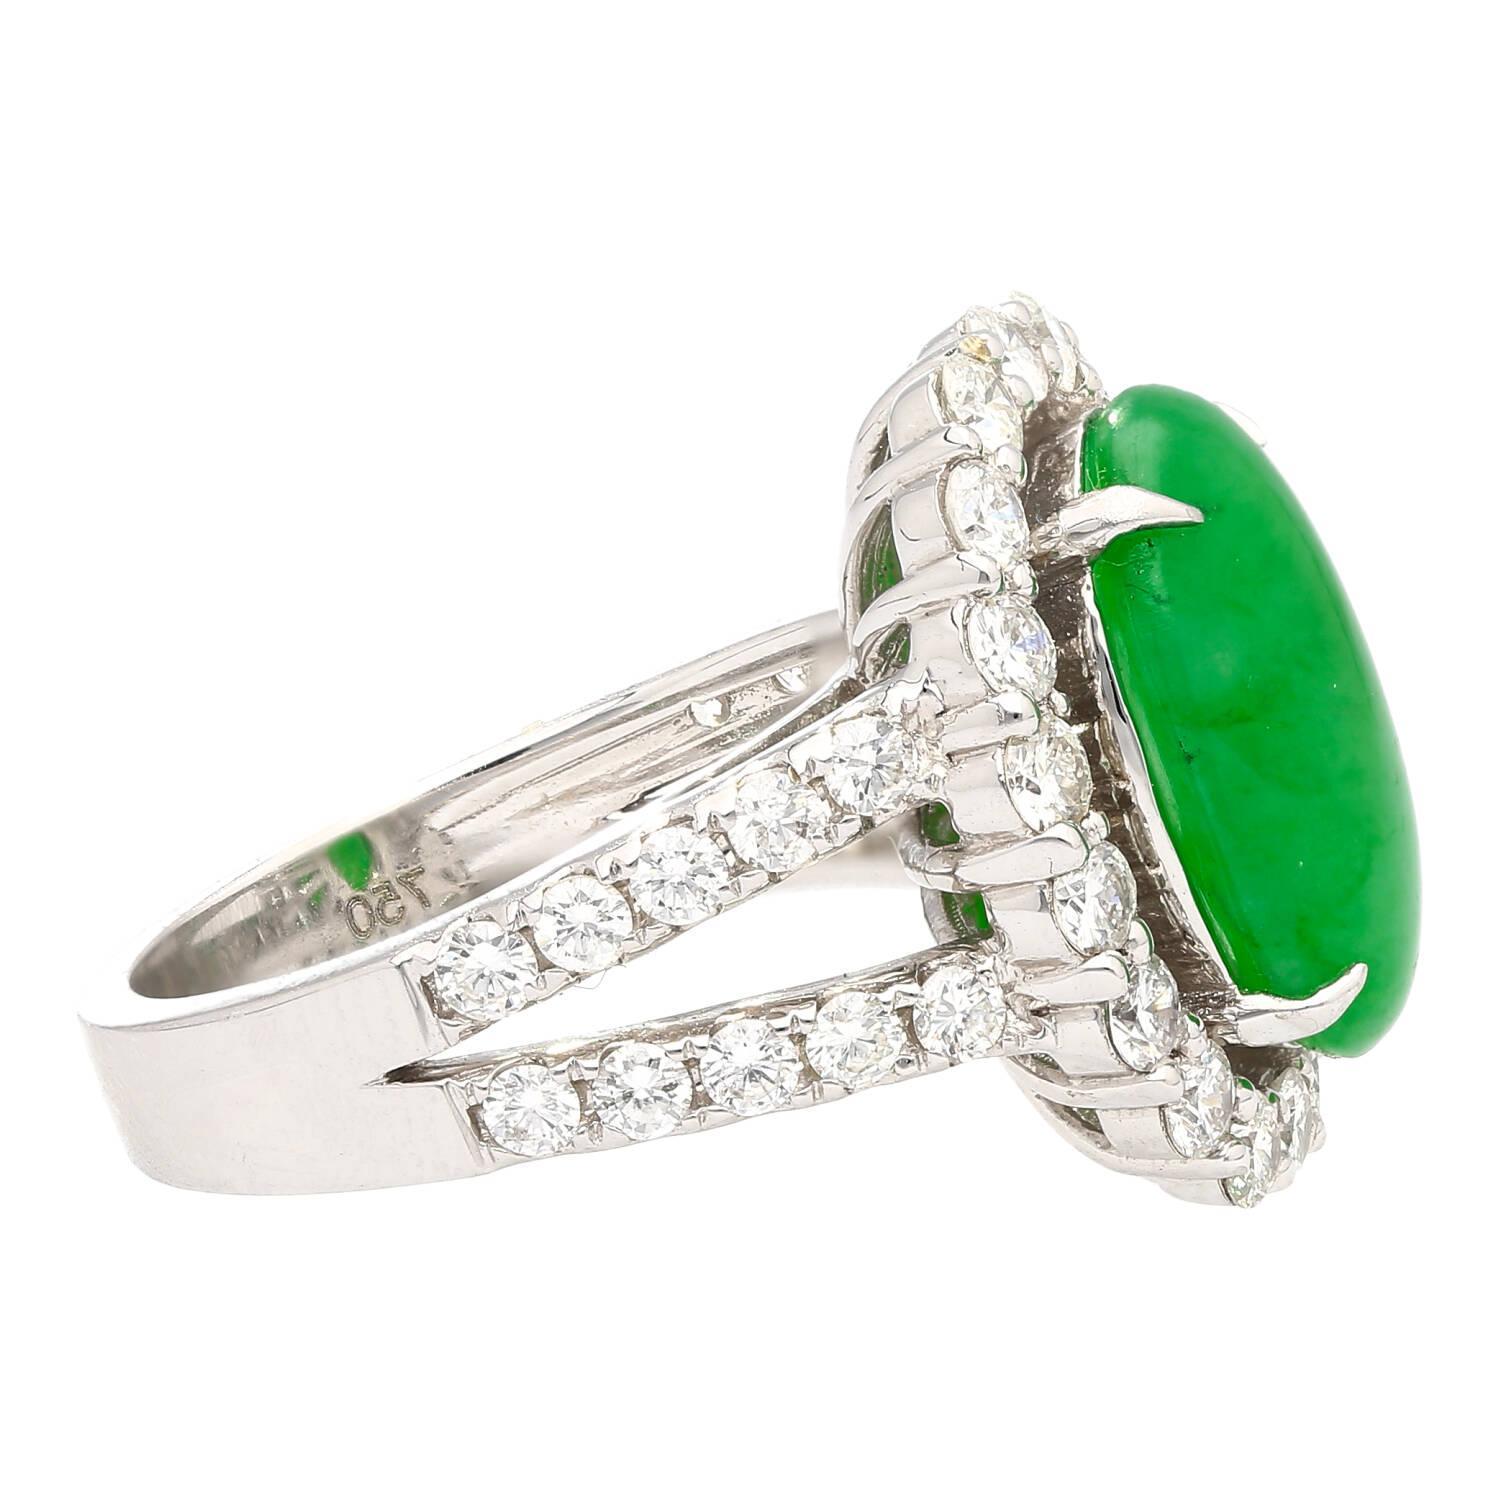 HK Lab Certified 5.329 Carat Jade and Diamond Halo Ring in 18K White Gold For Sale 2